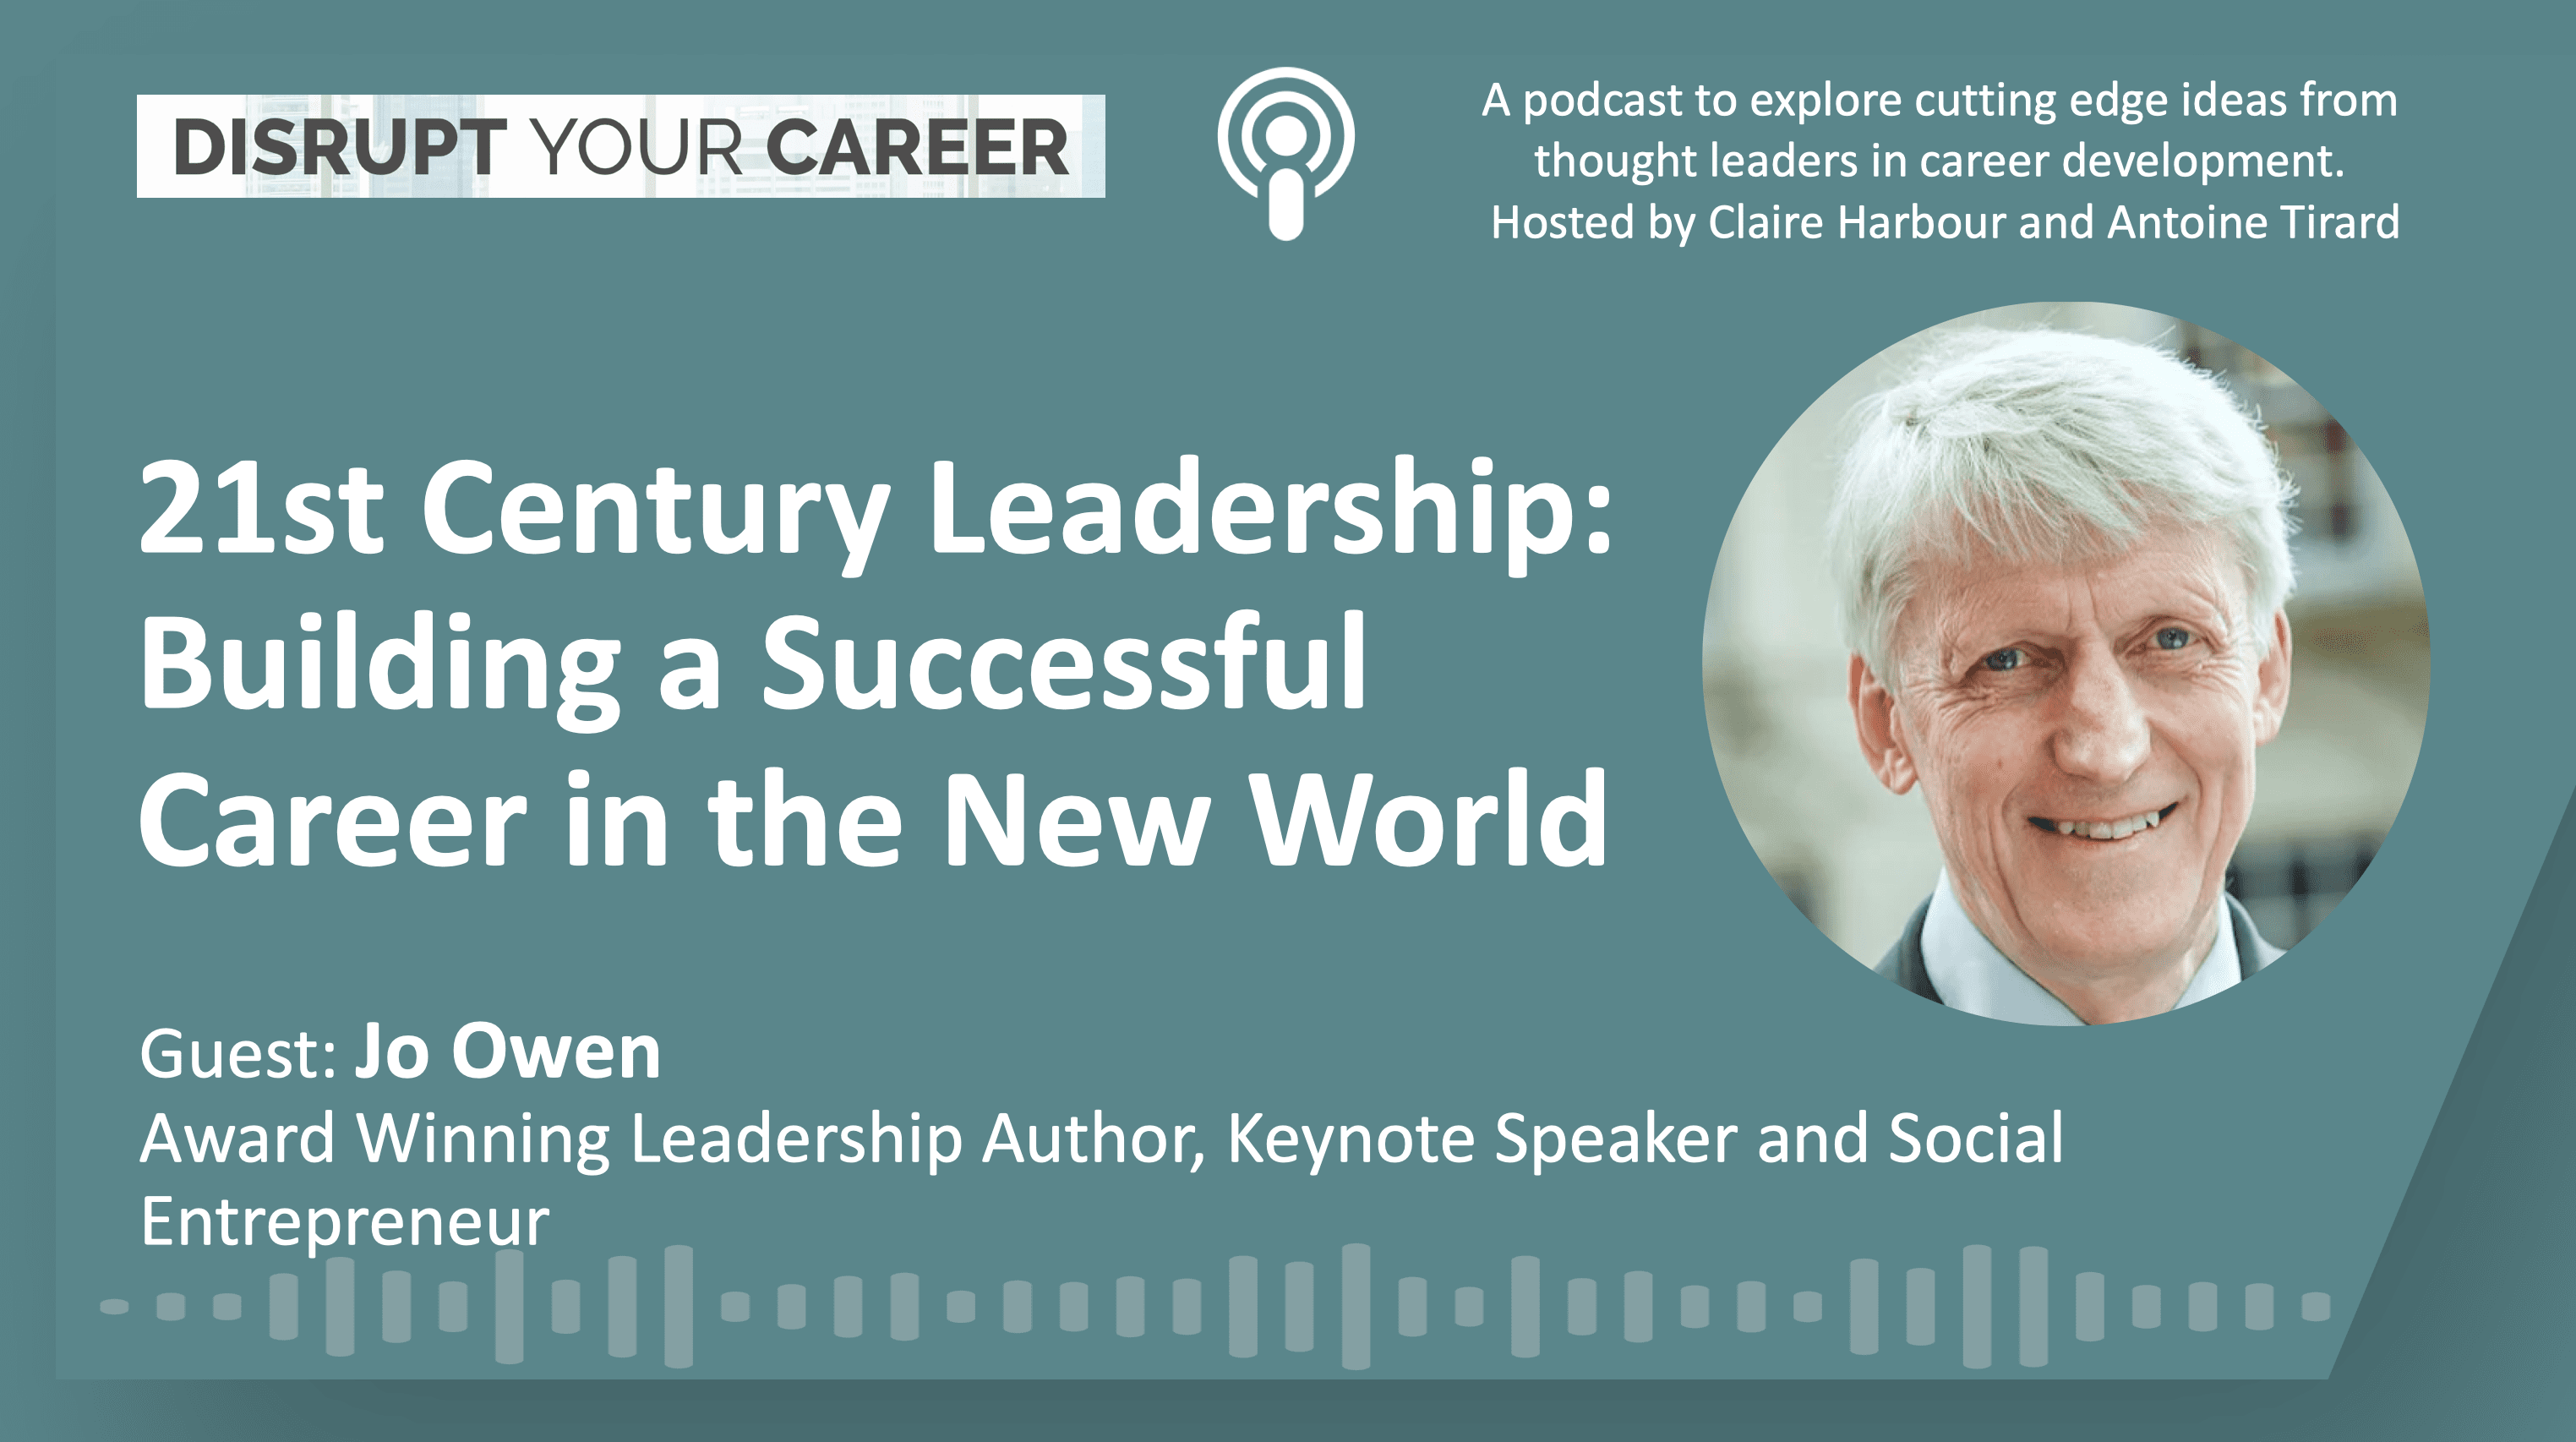 21st Century Leadership: Building a Successful Career in the New World